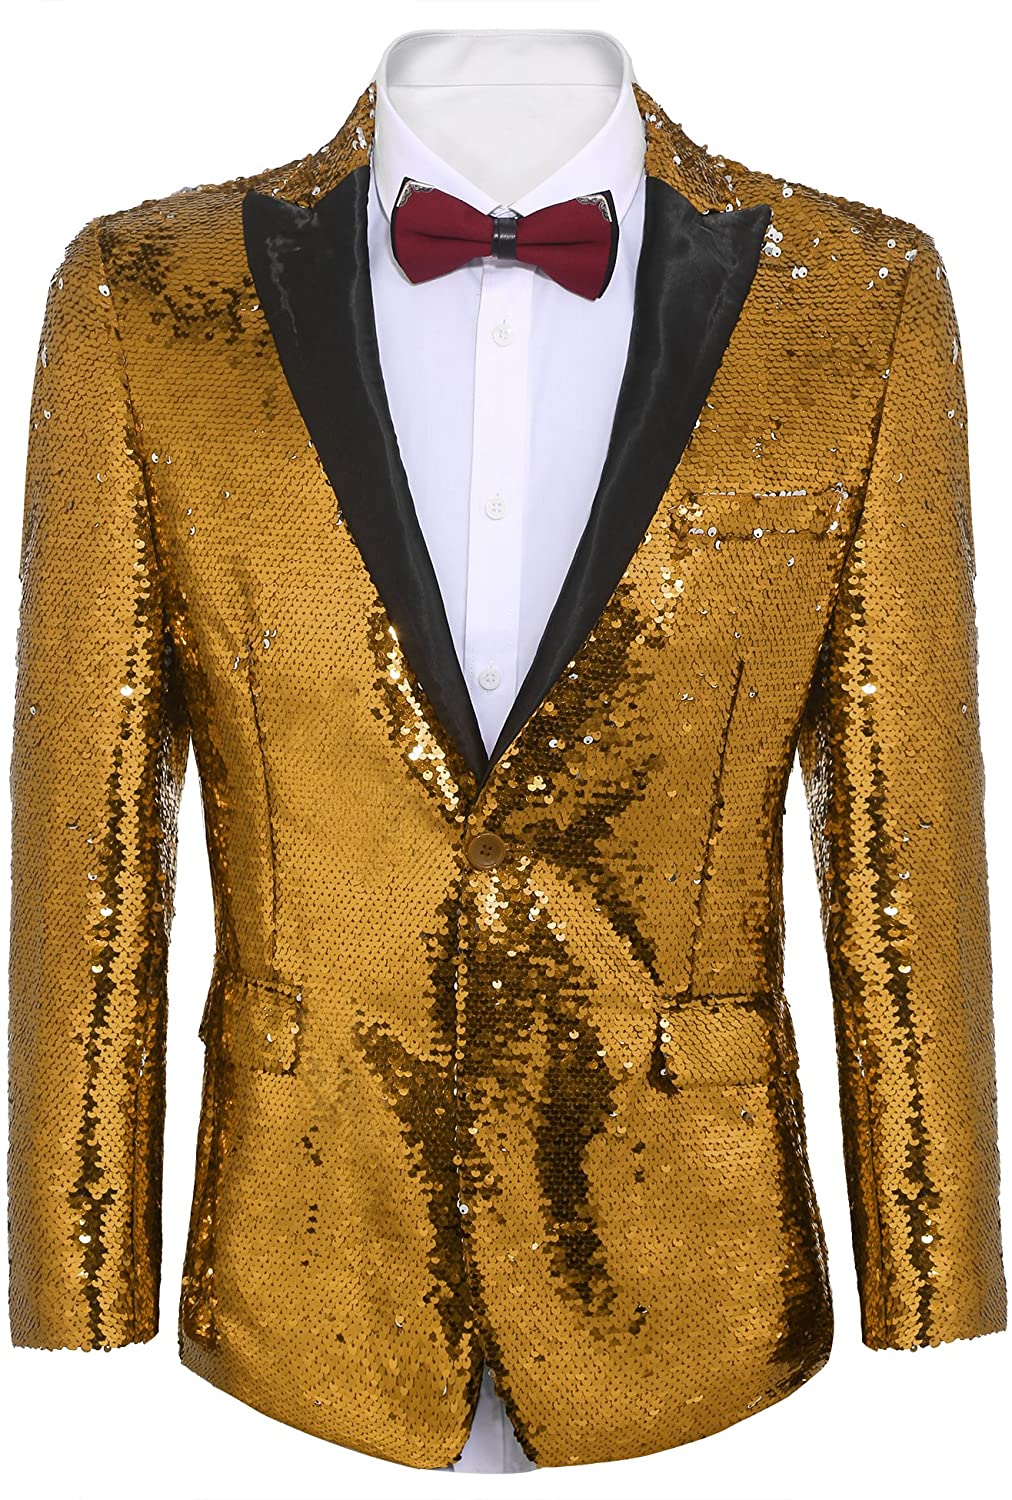 COOFANDY Mens Shiny Sequins Suit Jacket Blazer One Button Tuxedo for Party,Wedding,Banquet,Prom 